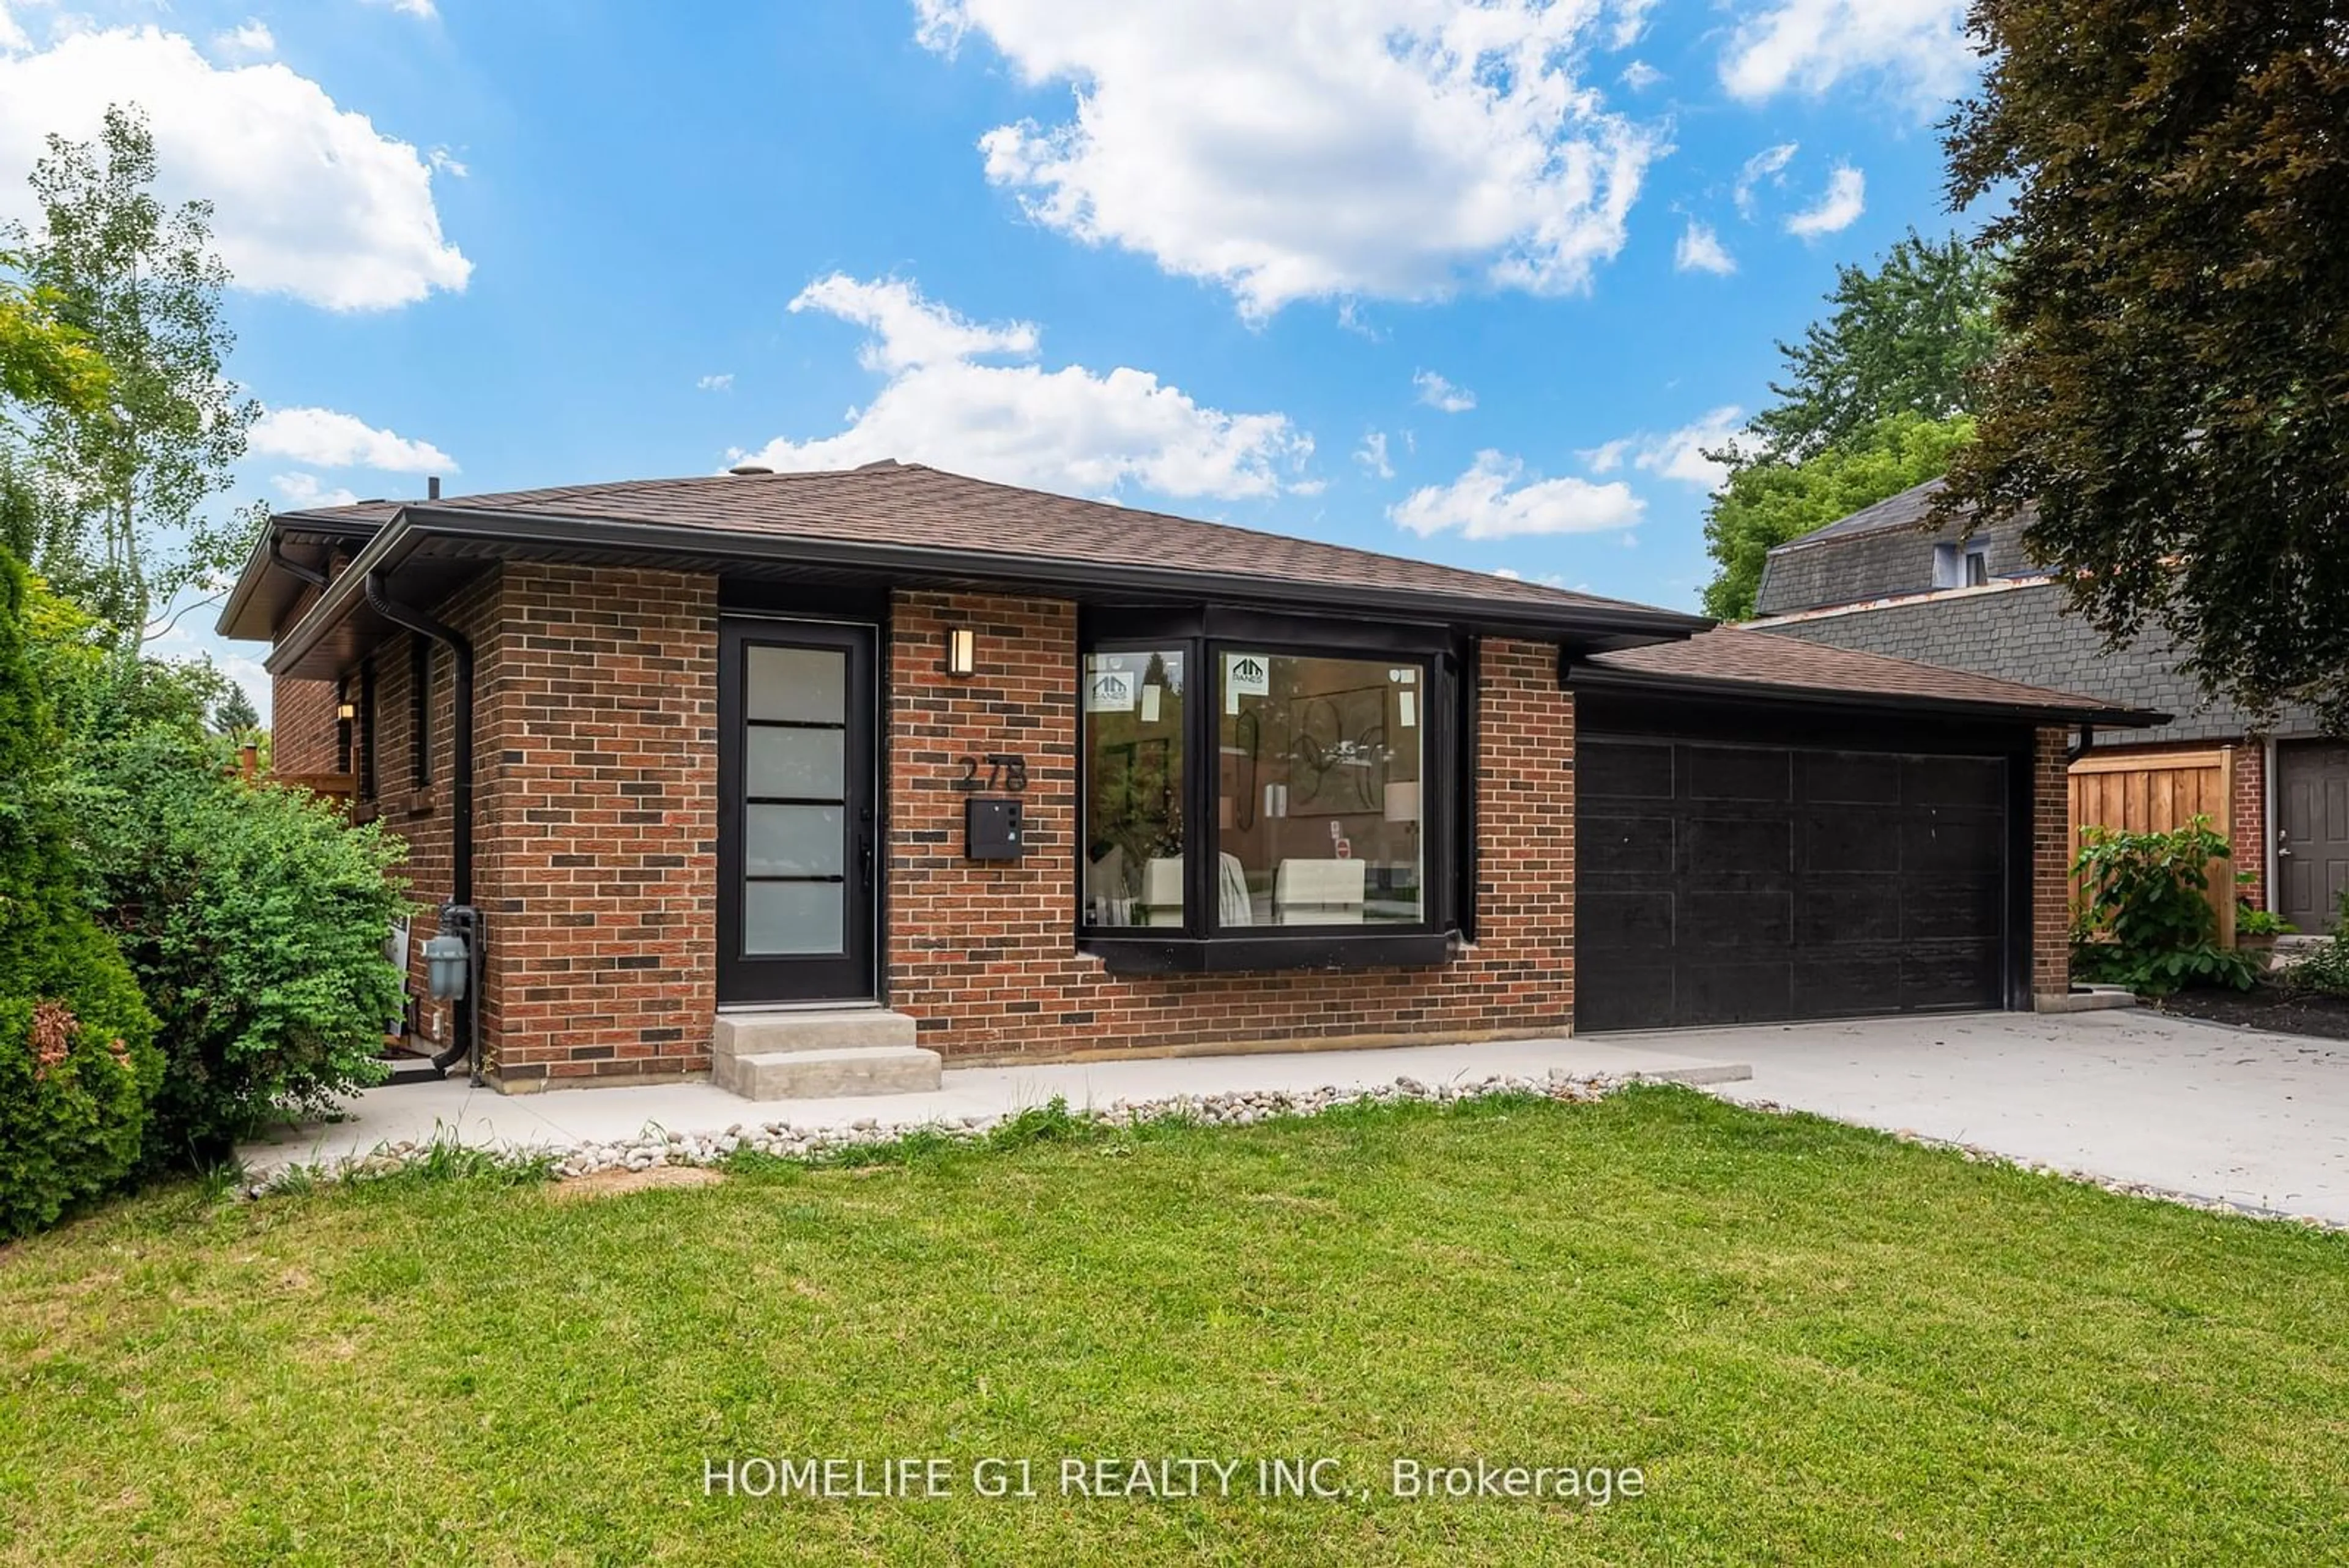 Home with brick exterior material for 278 Mississauga Valley Blvd, Mississauga Ontario L5A 1Y8